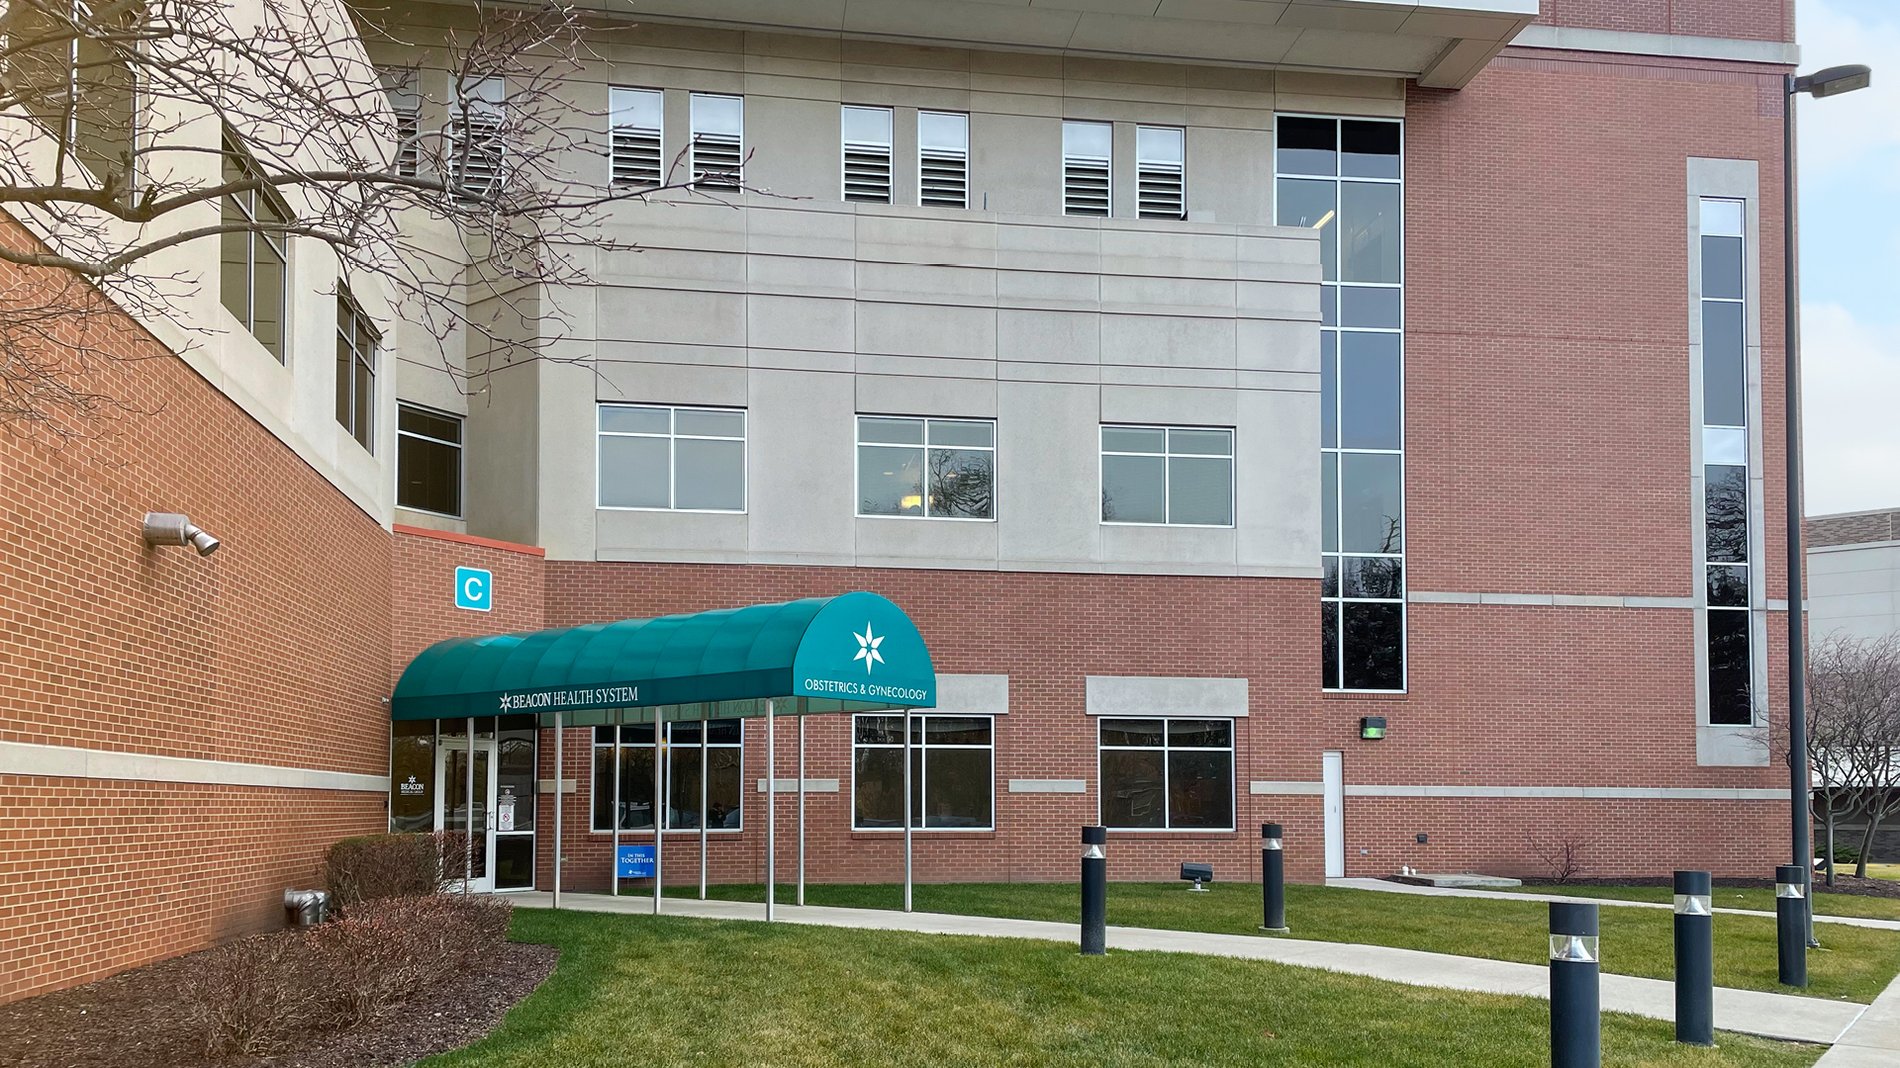 Entrance C at Elkhart General Hospital has a teal awning that welcomes patients for obstetrics and gynecology.